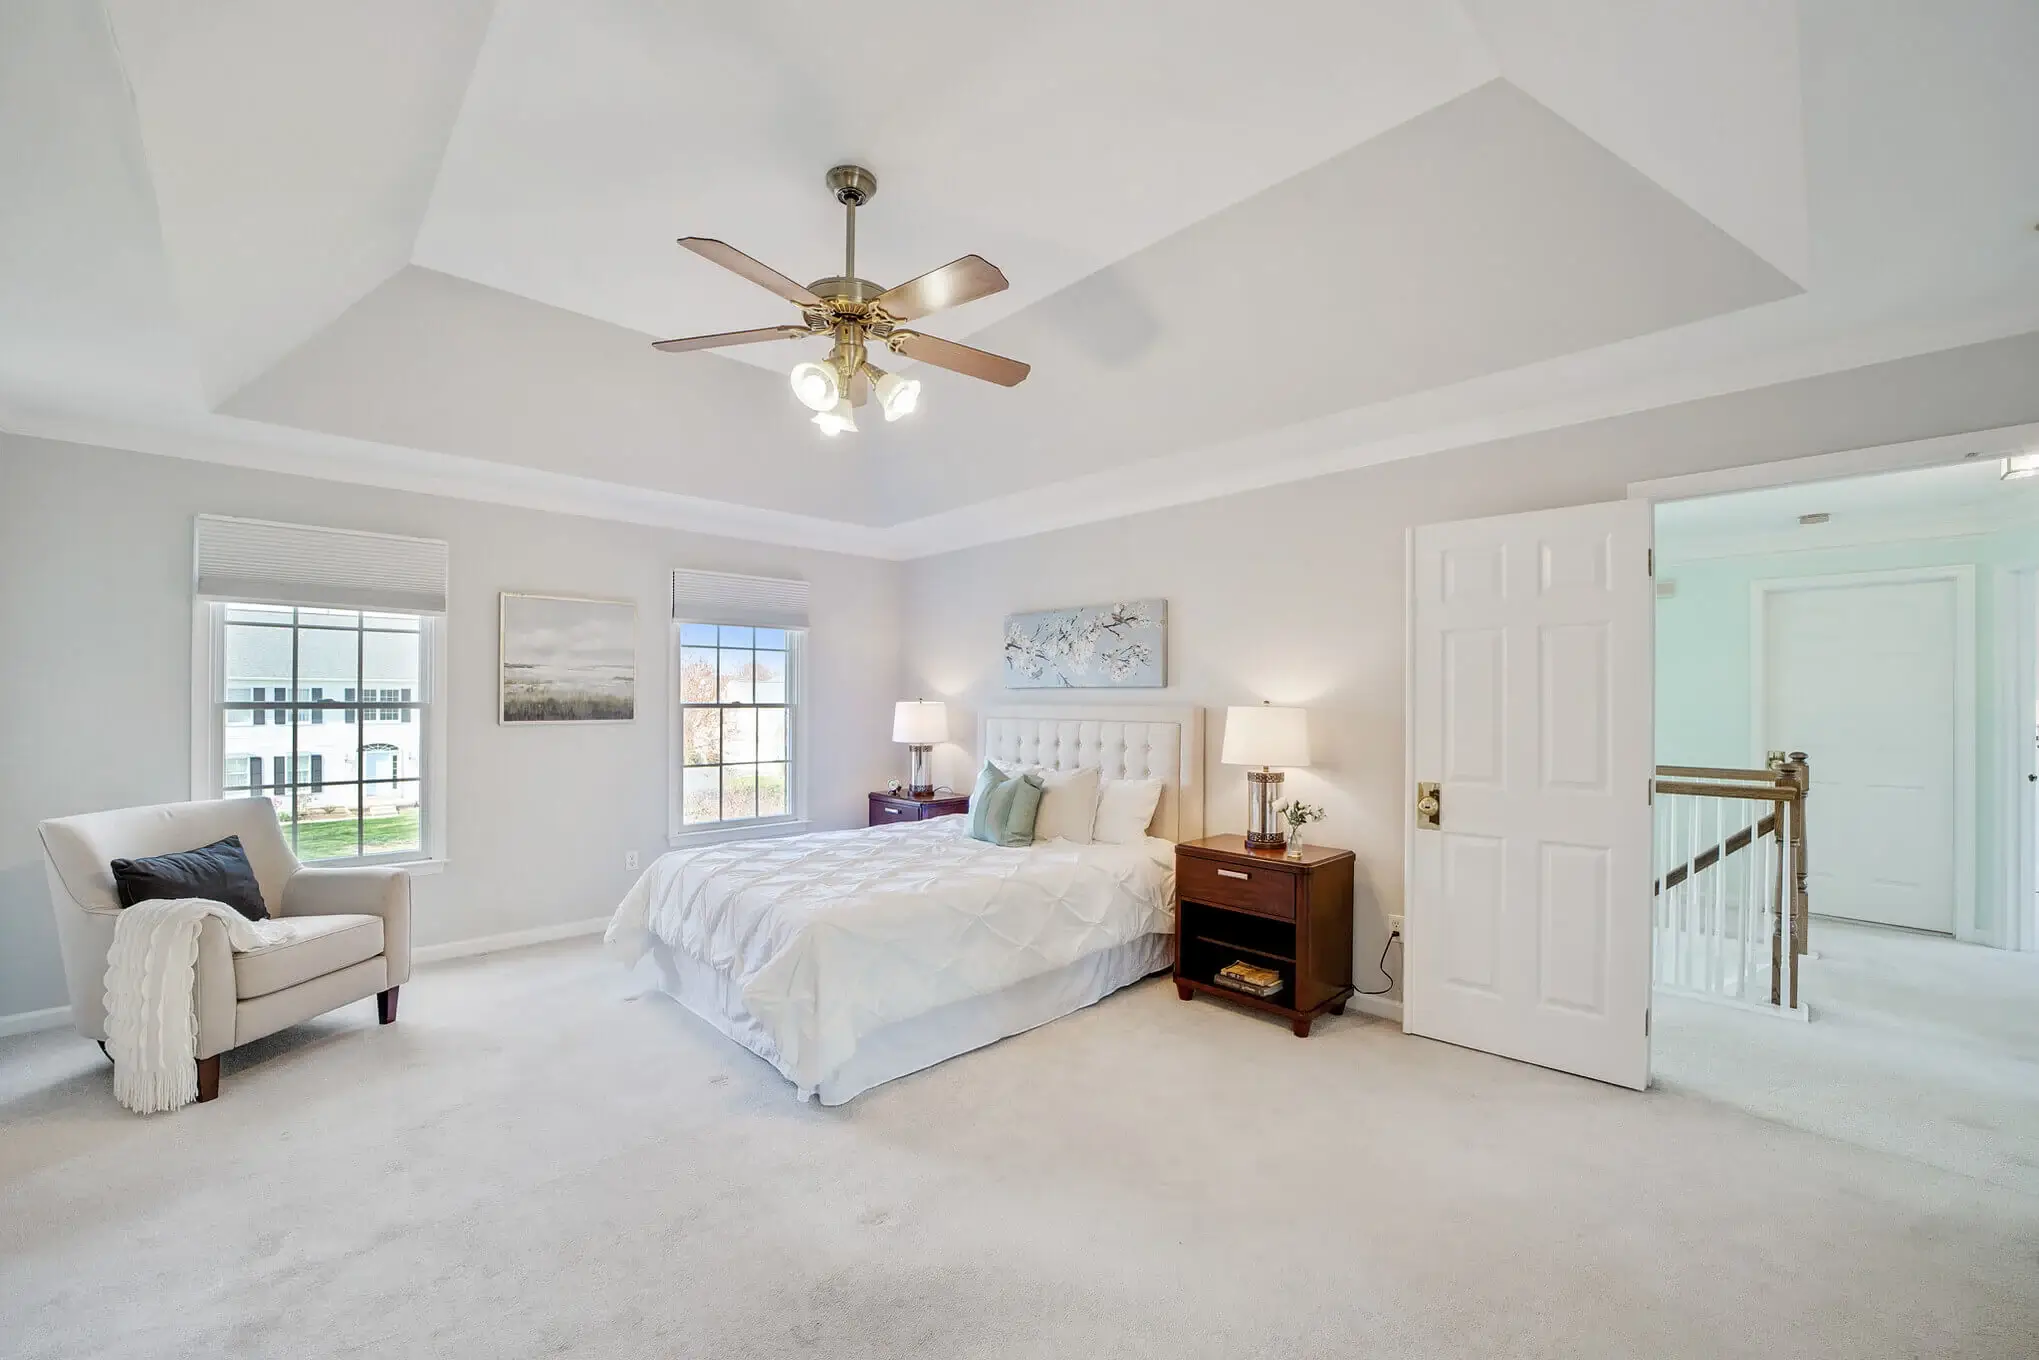 Large white bedroom with a ceiling fan in the center.